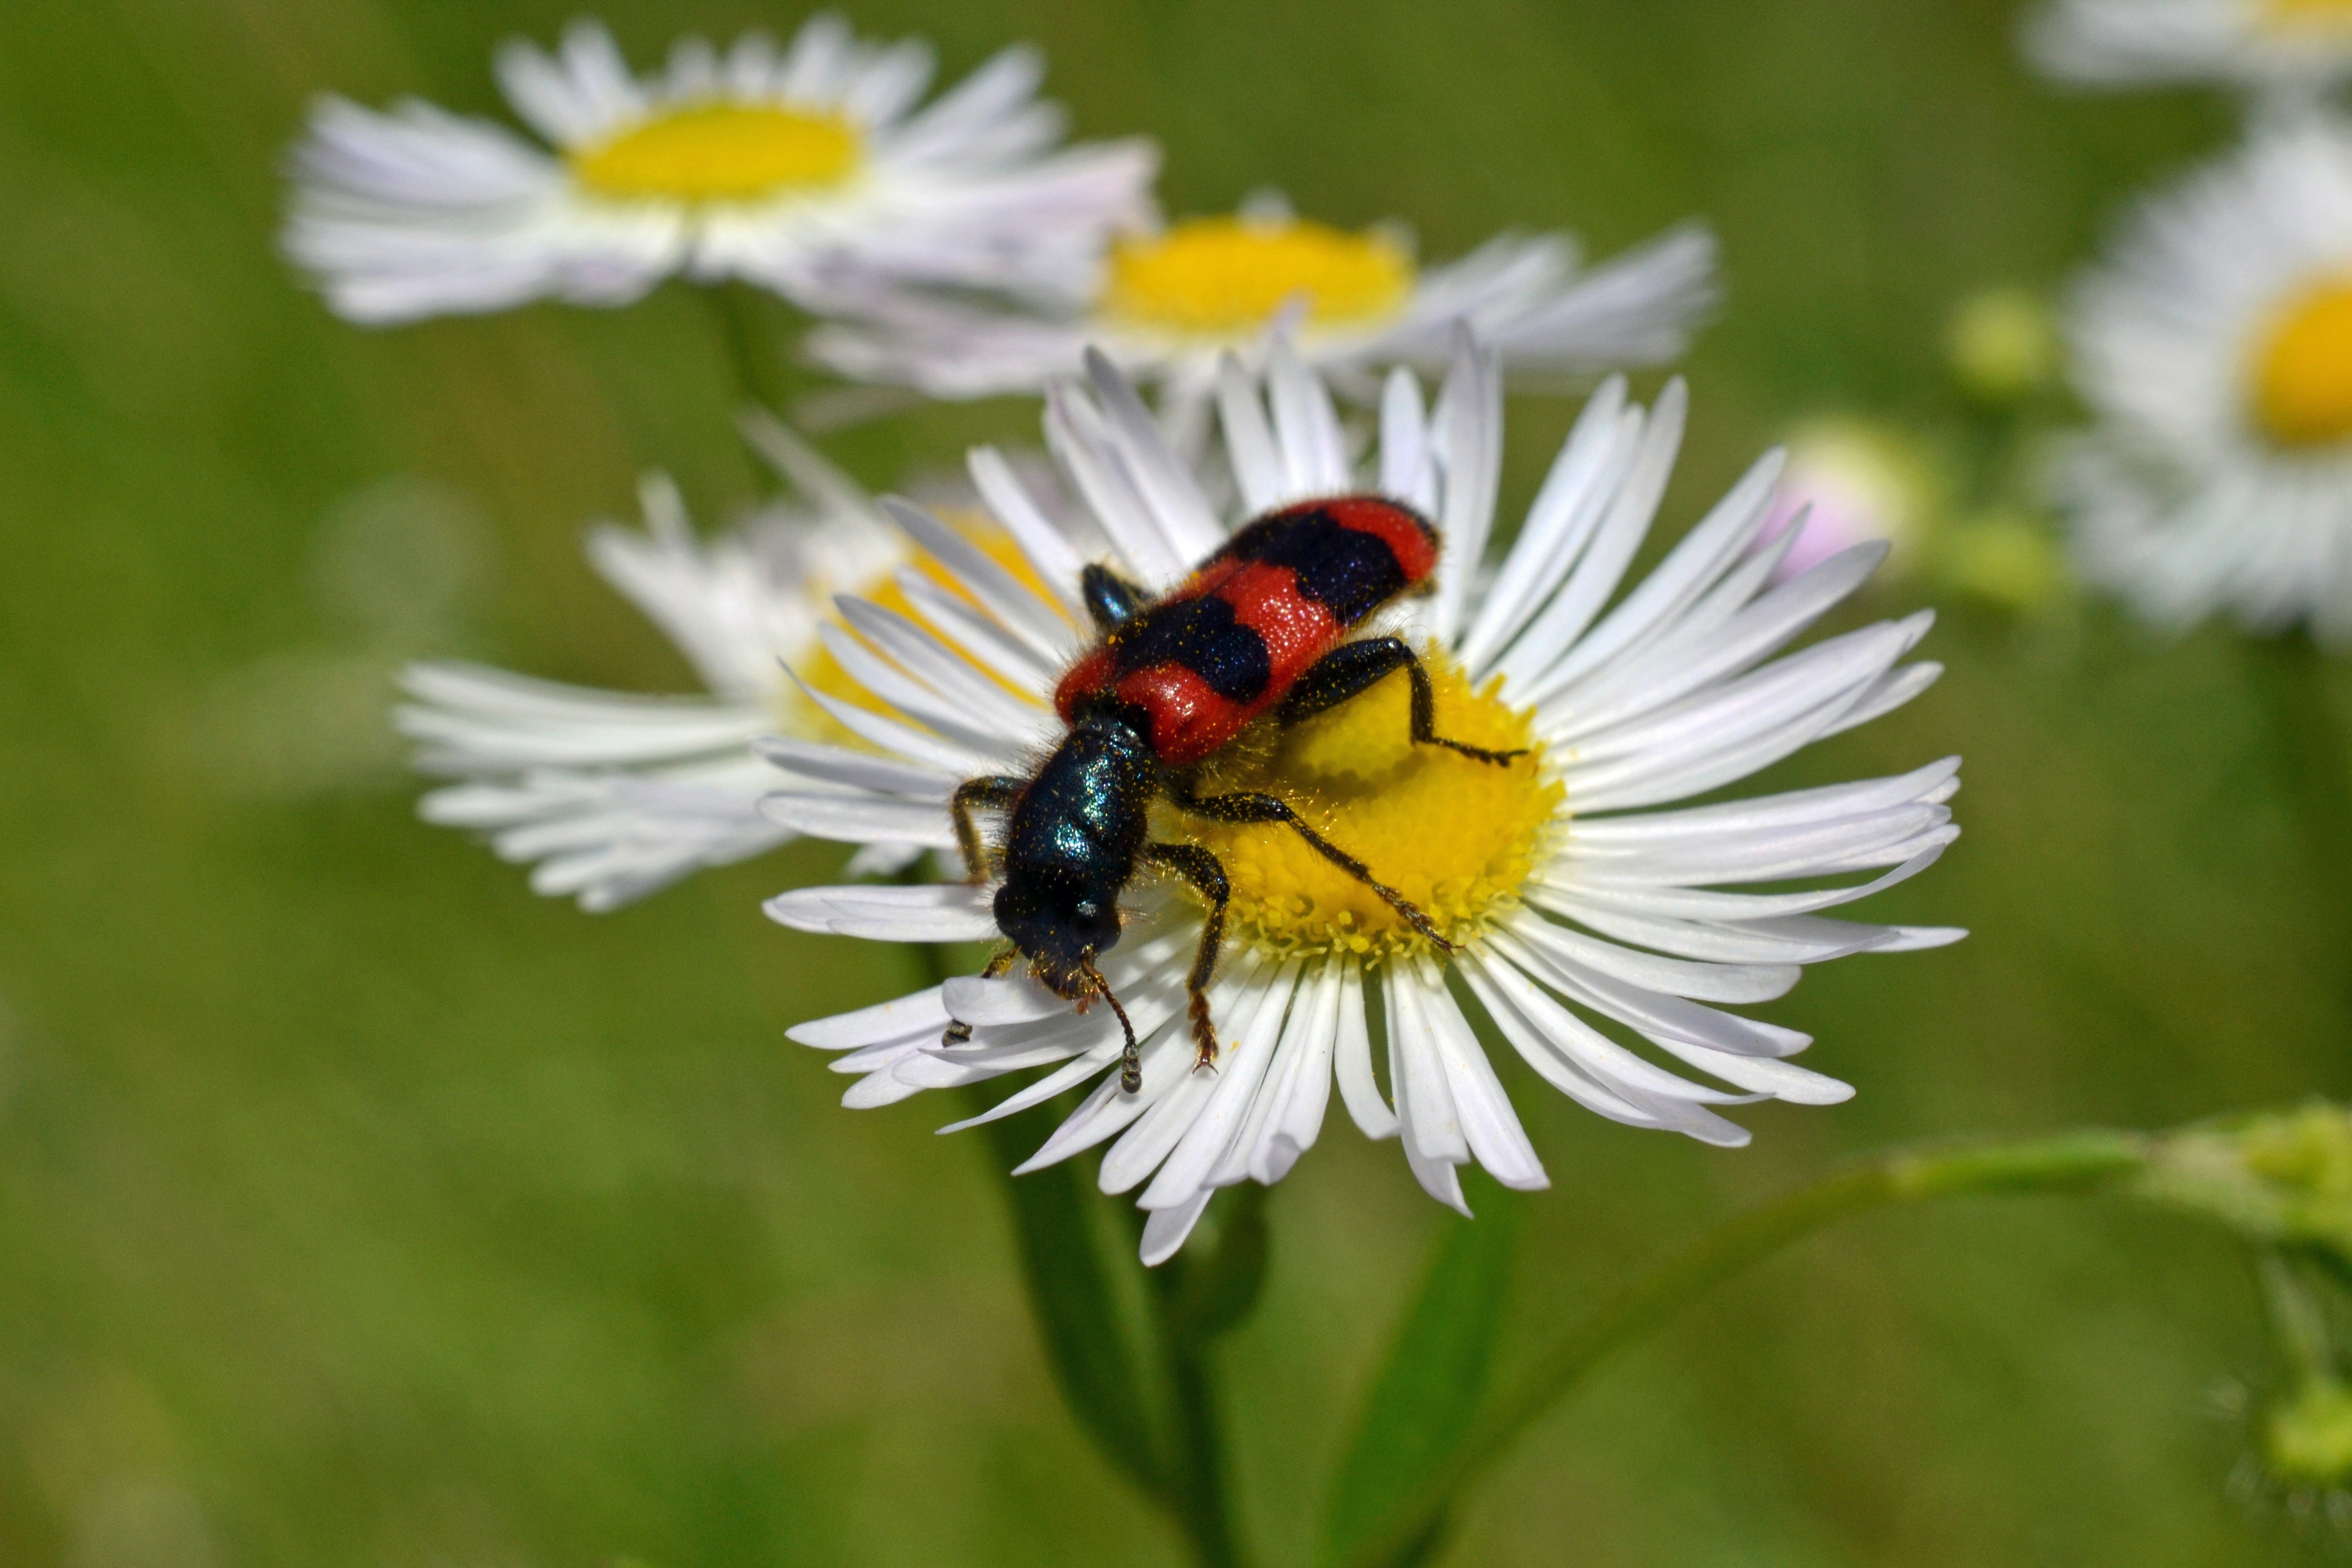 red and black bug on white and yellow flower shallow focus photo